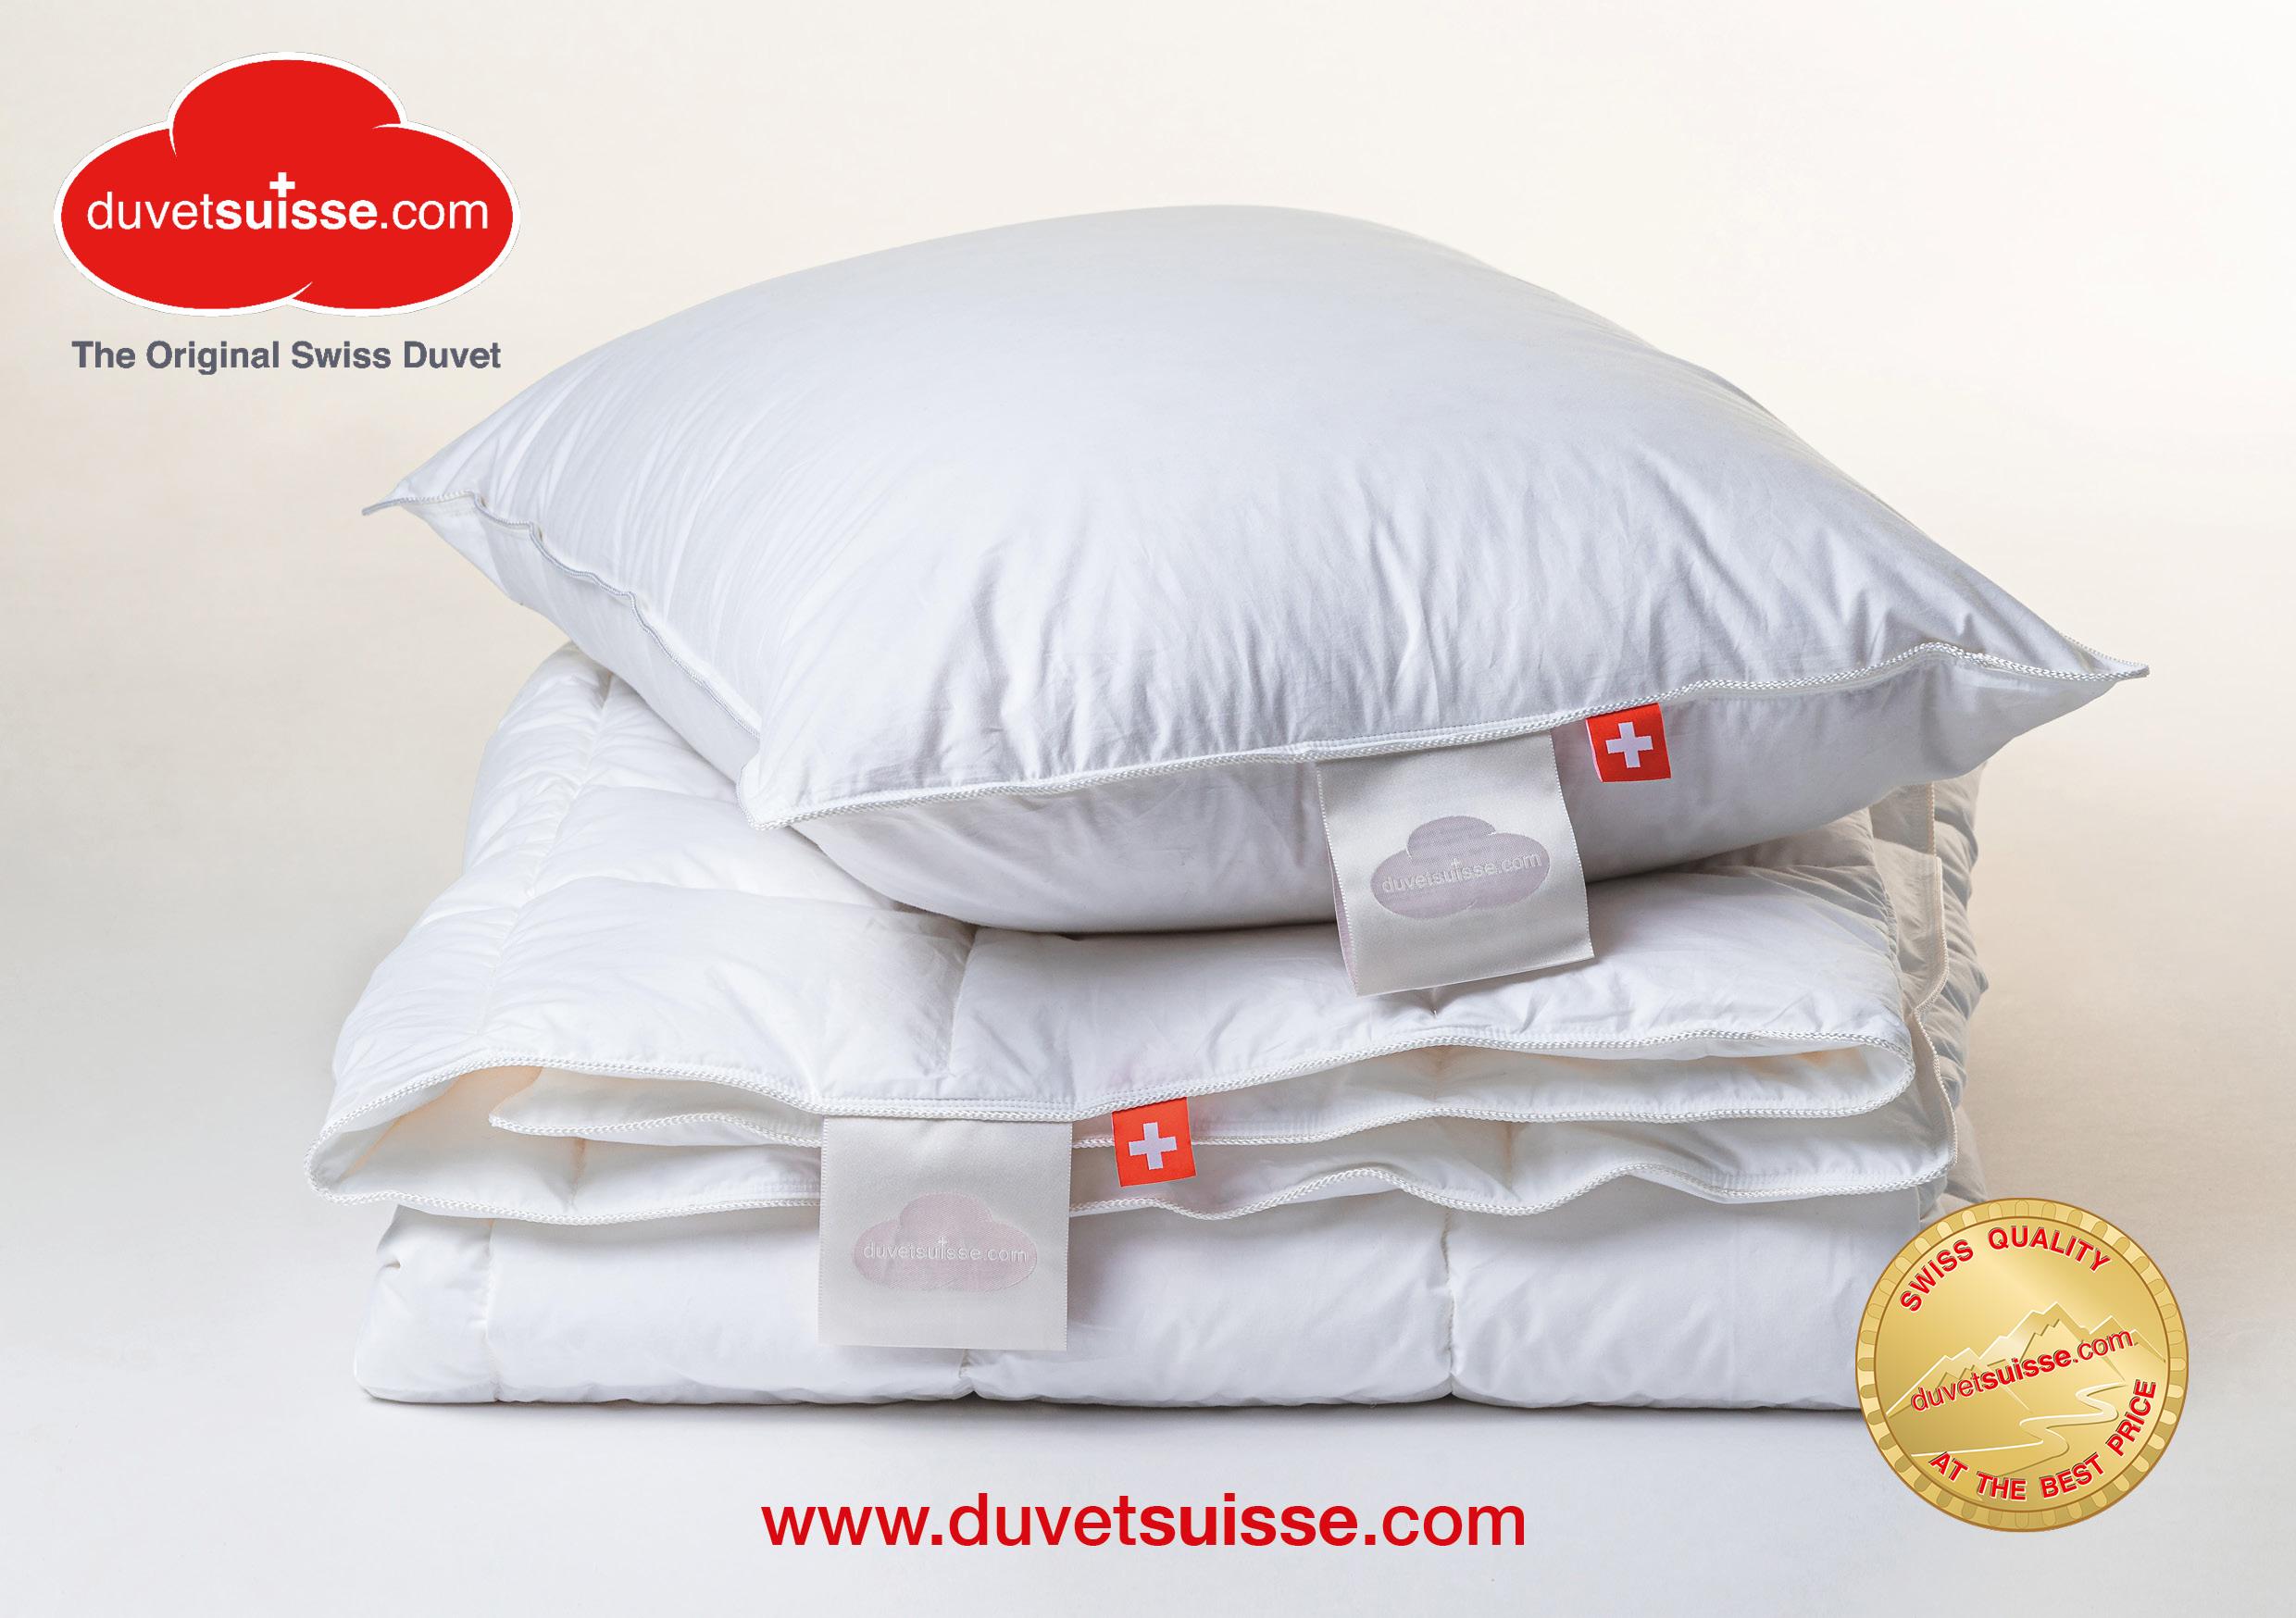 duvetsuisse-combo-picture-cosy-duvet-and-comfortable-pillow